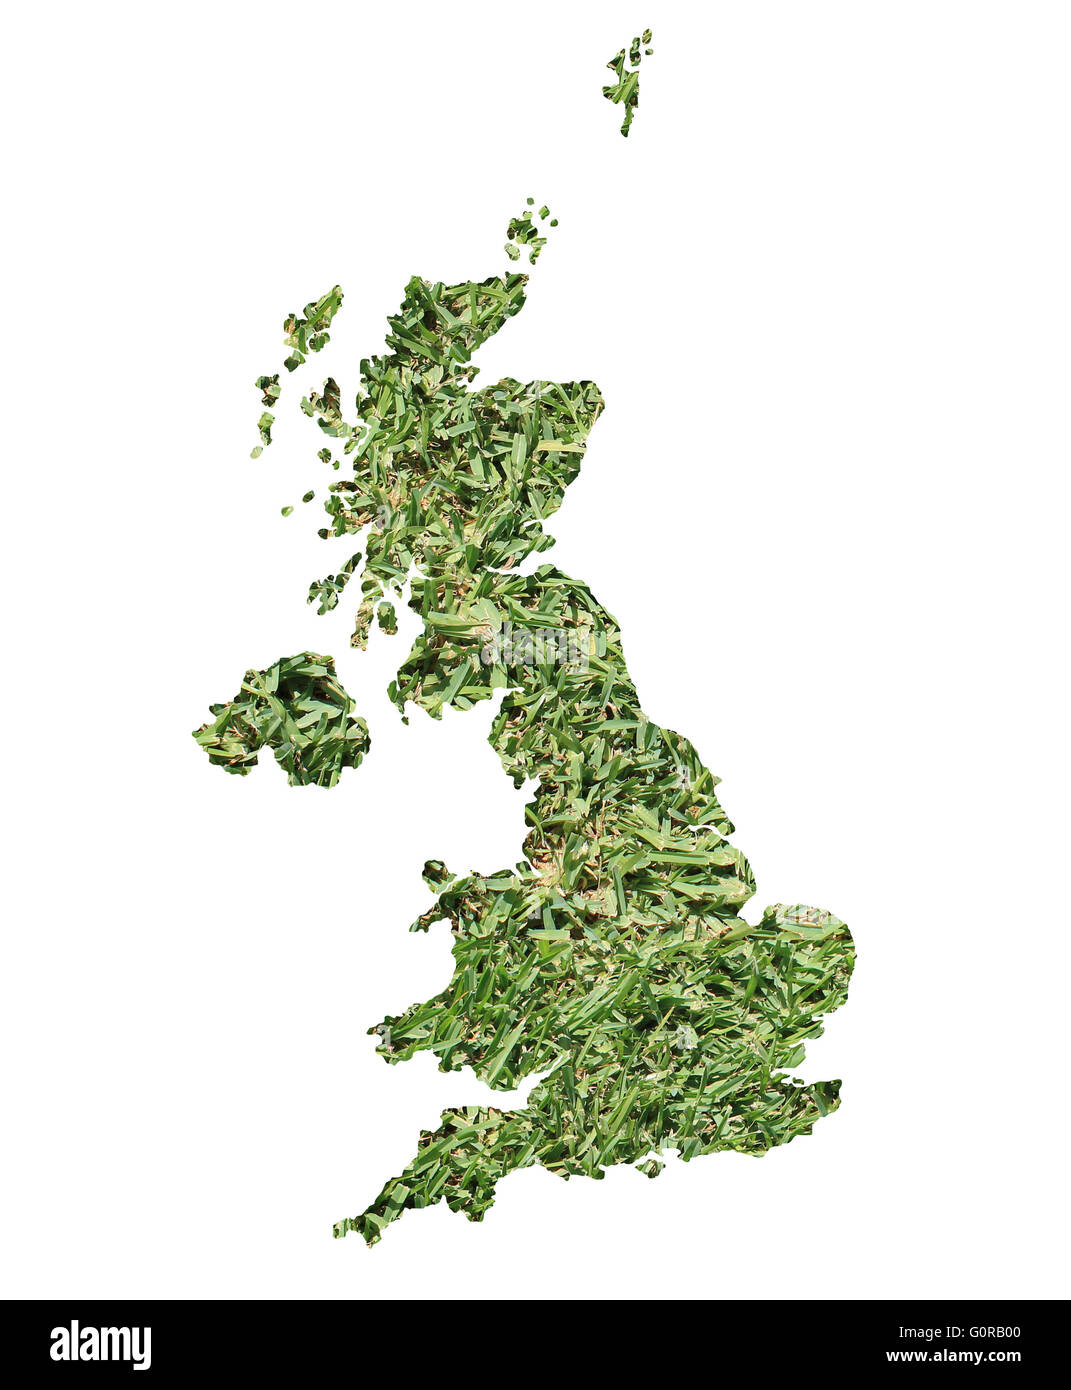 Map of United Kingdom filled with green grass, environmental and ecological concept. Stock Photo